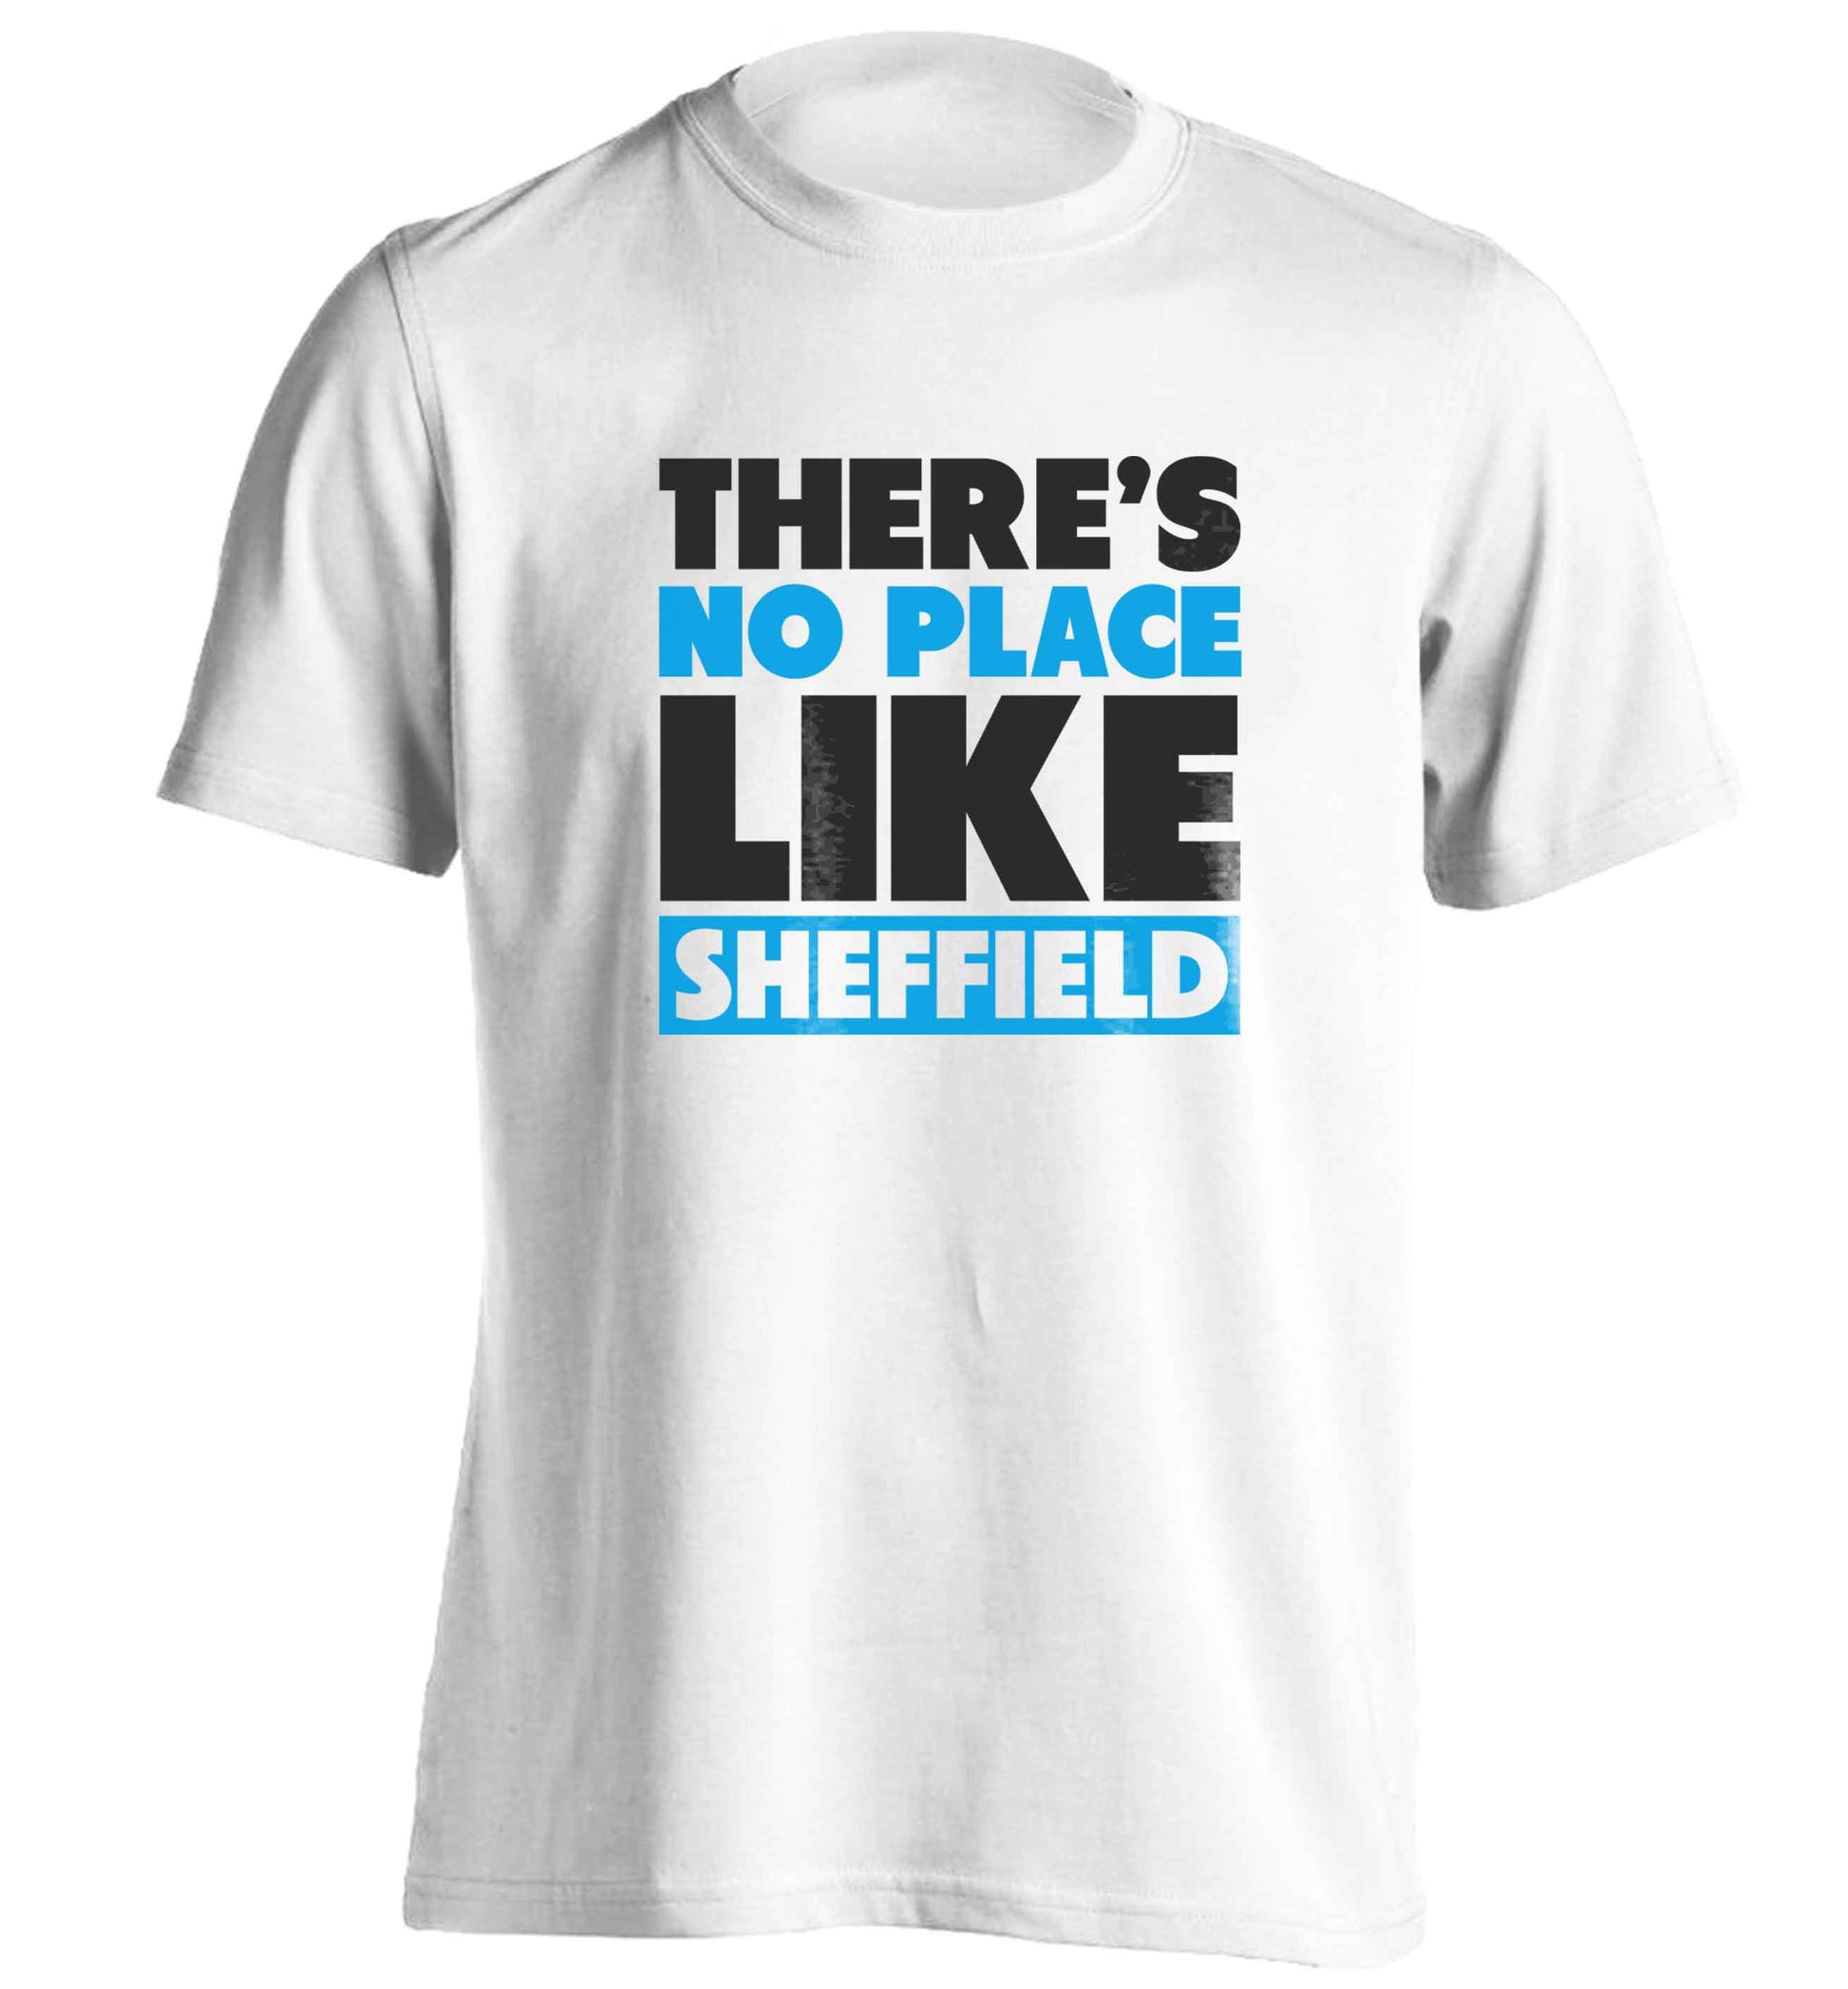 There's no place like Sheffield adults unisex white Tshirt 2XL